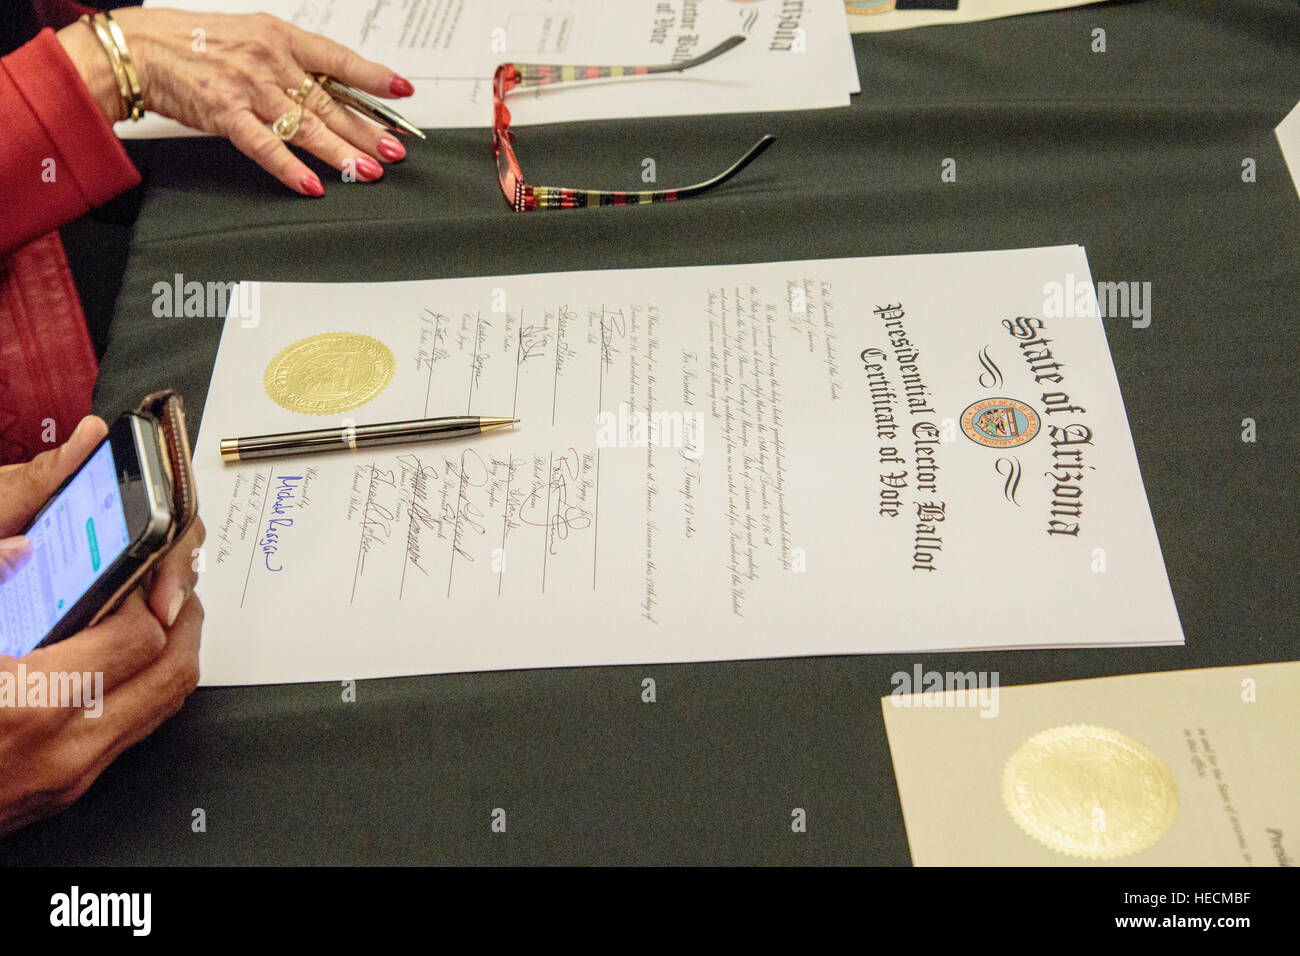 Phoenix, Arizona, USA. 19th December, 2016. Presidential electors cast their vote for Donald Trump during the Meeting of the Electoral College at the Arizona State Capitol. Despite protests outside the building, all eleven electors cast their vote in accordance with the popular vote of Arizona. © Jennifer Mack/Alamy Live News Stock Photo